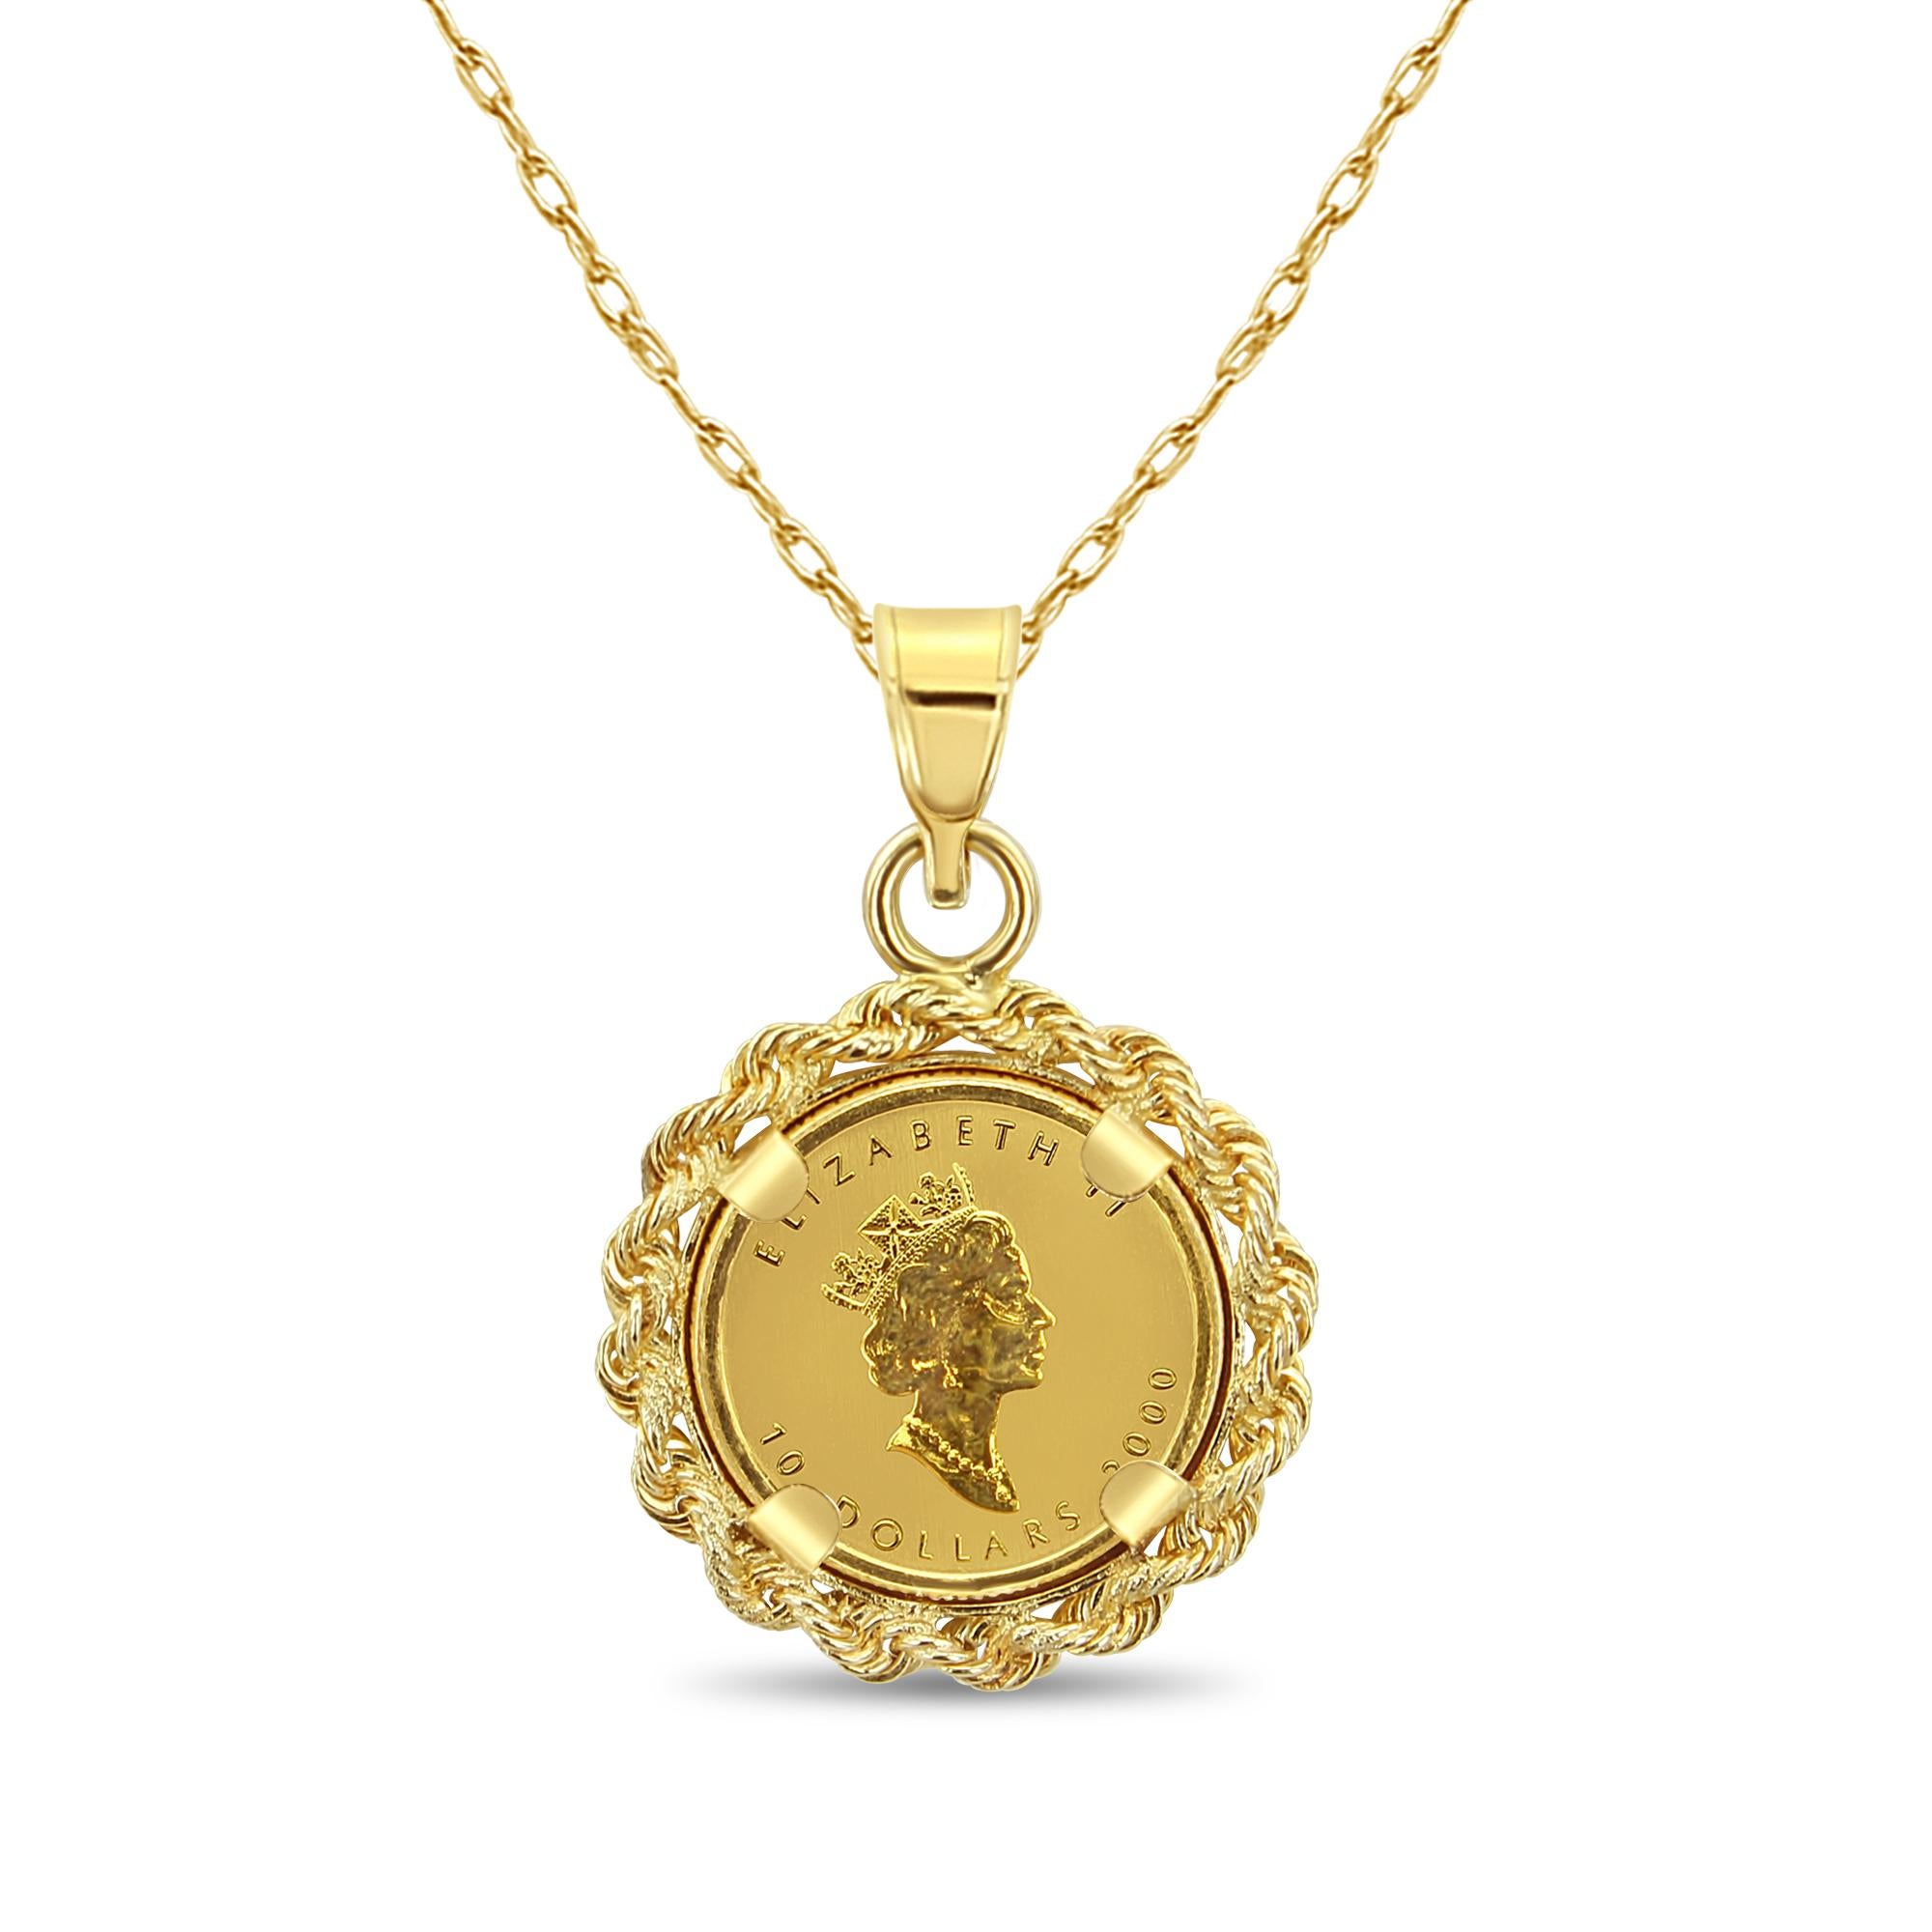 Canadian Maple Leaf Necklace with Rope Bezel 14k Yellow Gold

This exceptional piece captures the essence of Canadian heritage and natural beauty, making it a perfect addition to your jewelry collection. The pendant features the renowned Canadian